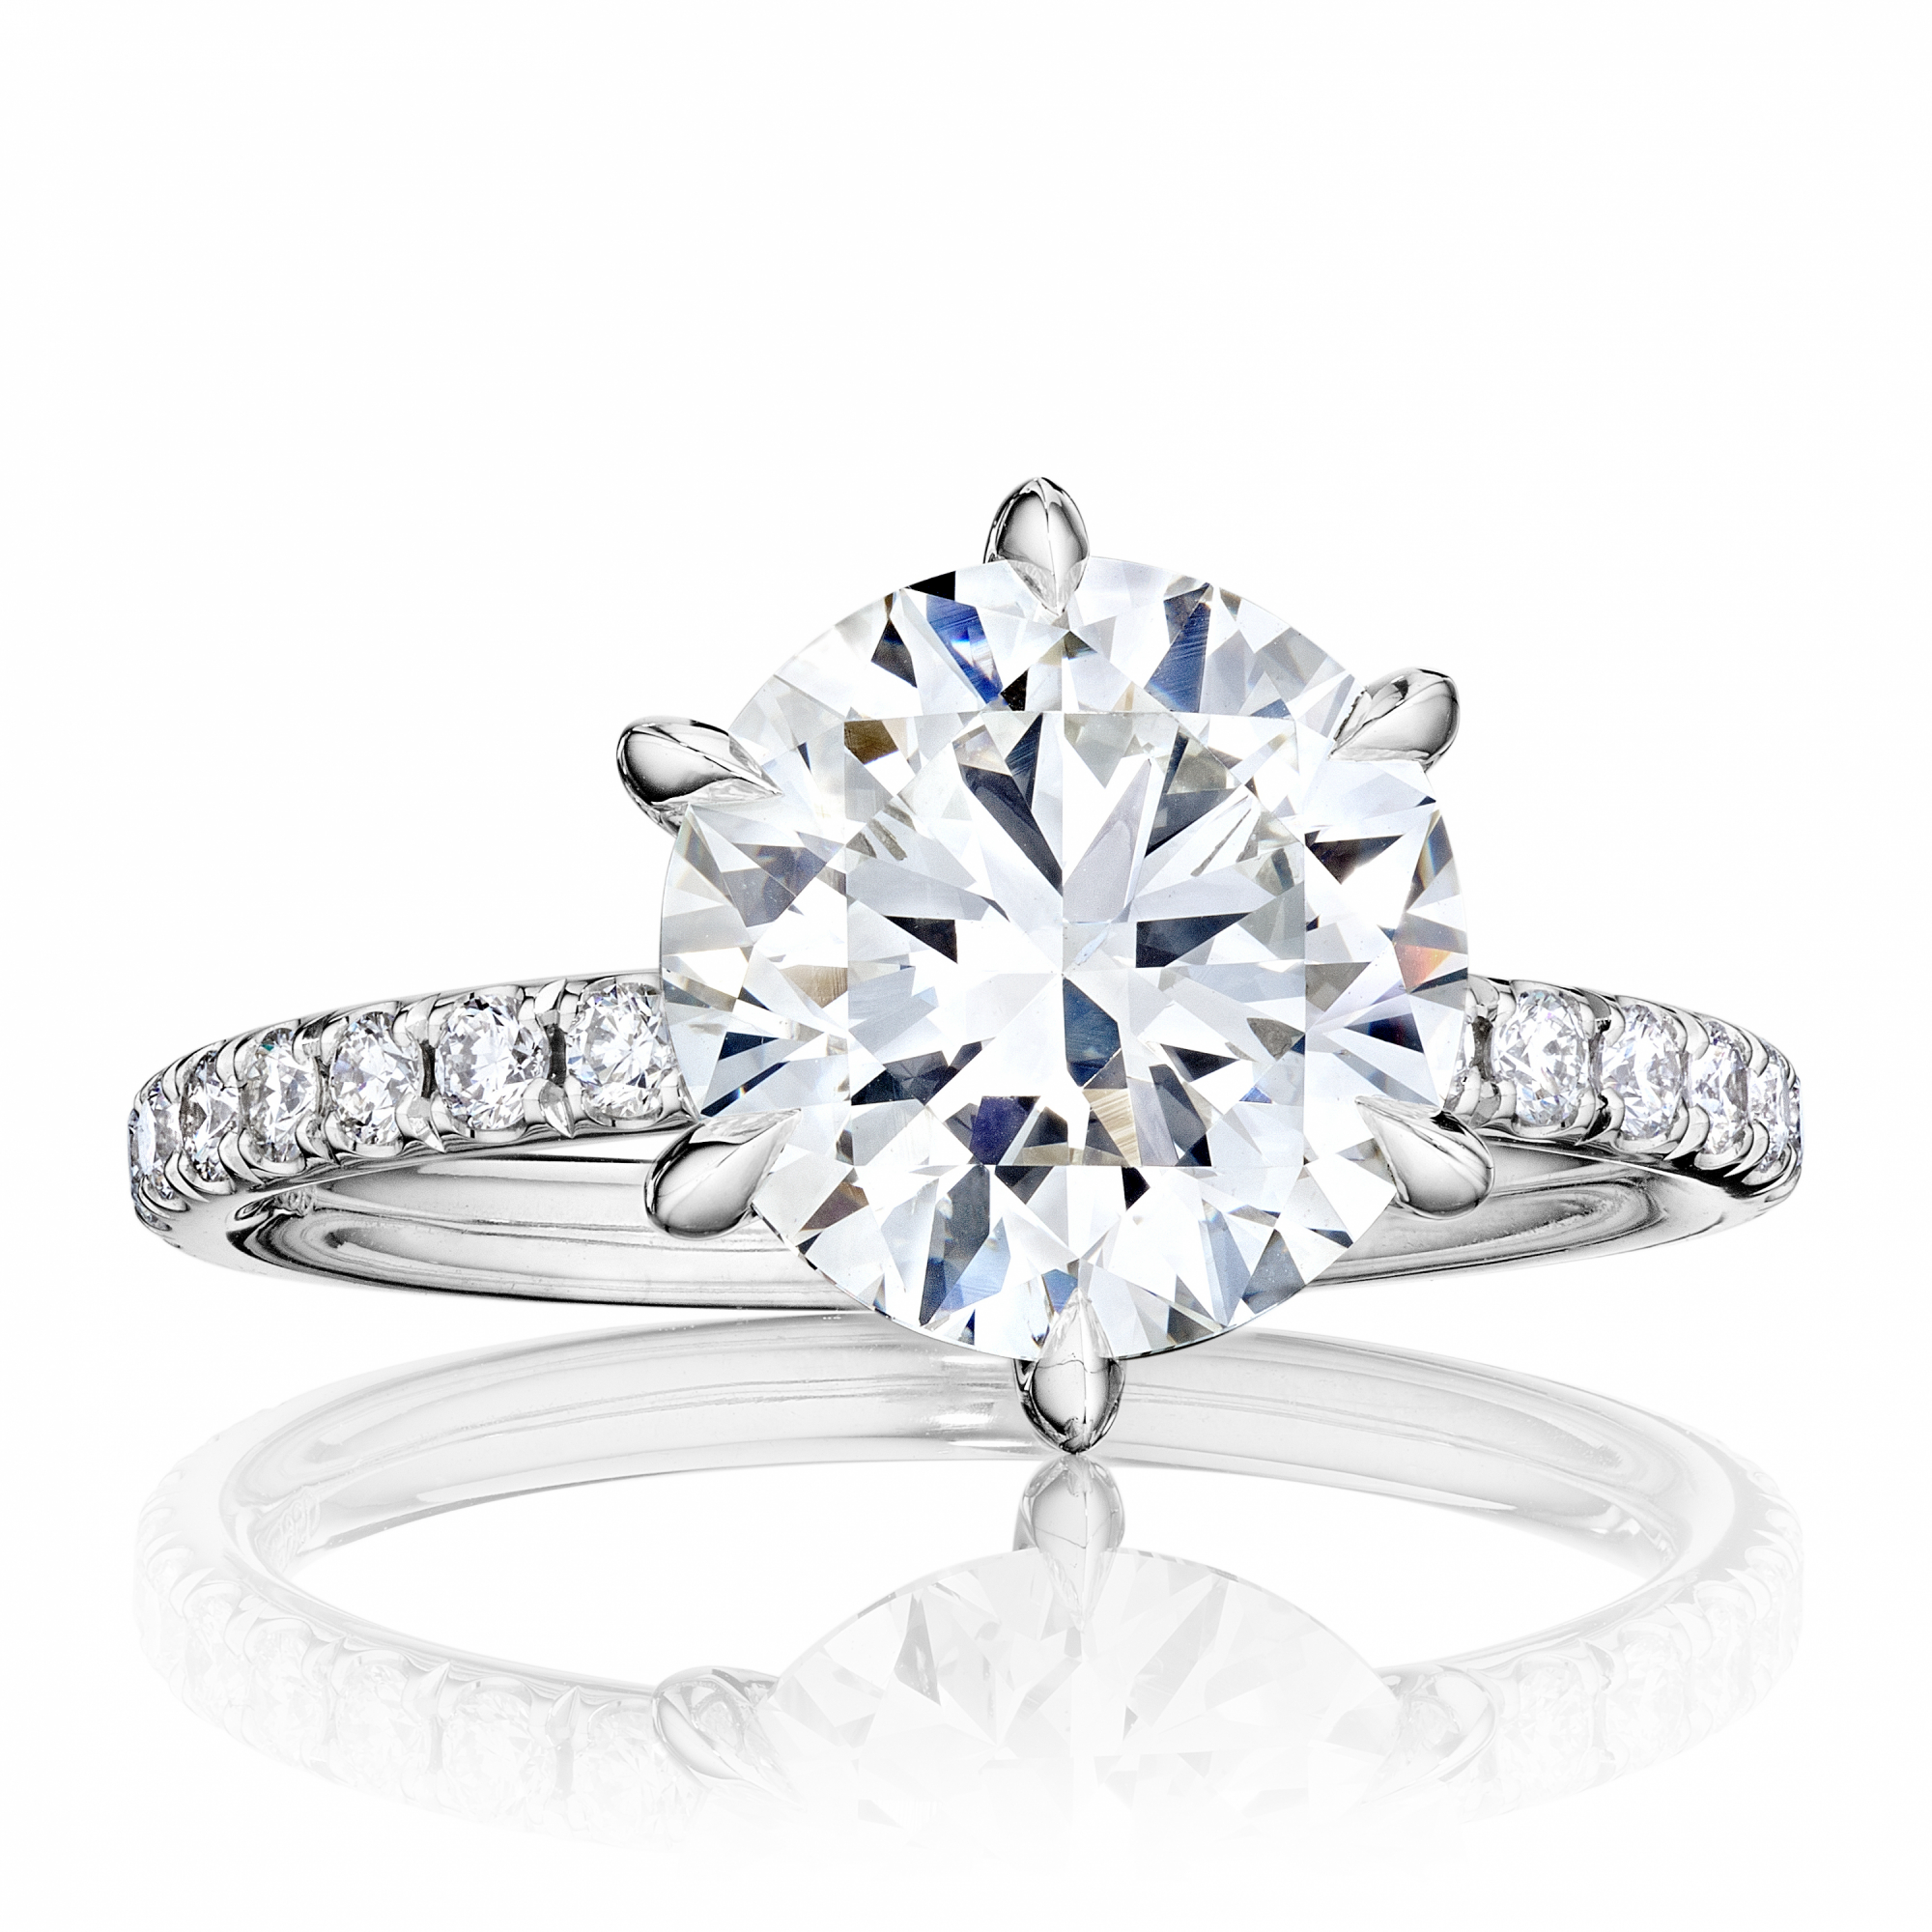 Resetting Diamonds Into A New Ring - Cost, How To, & More!